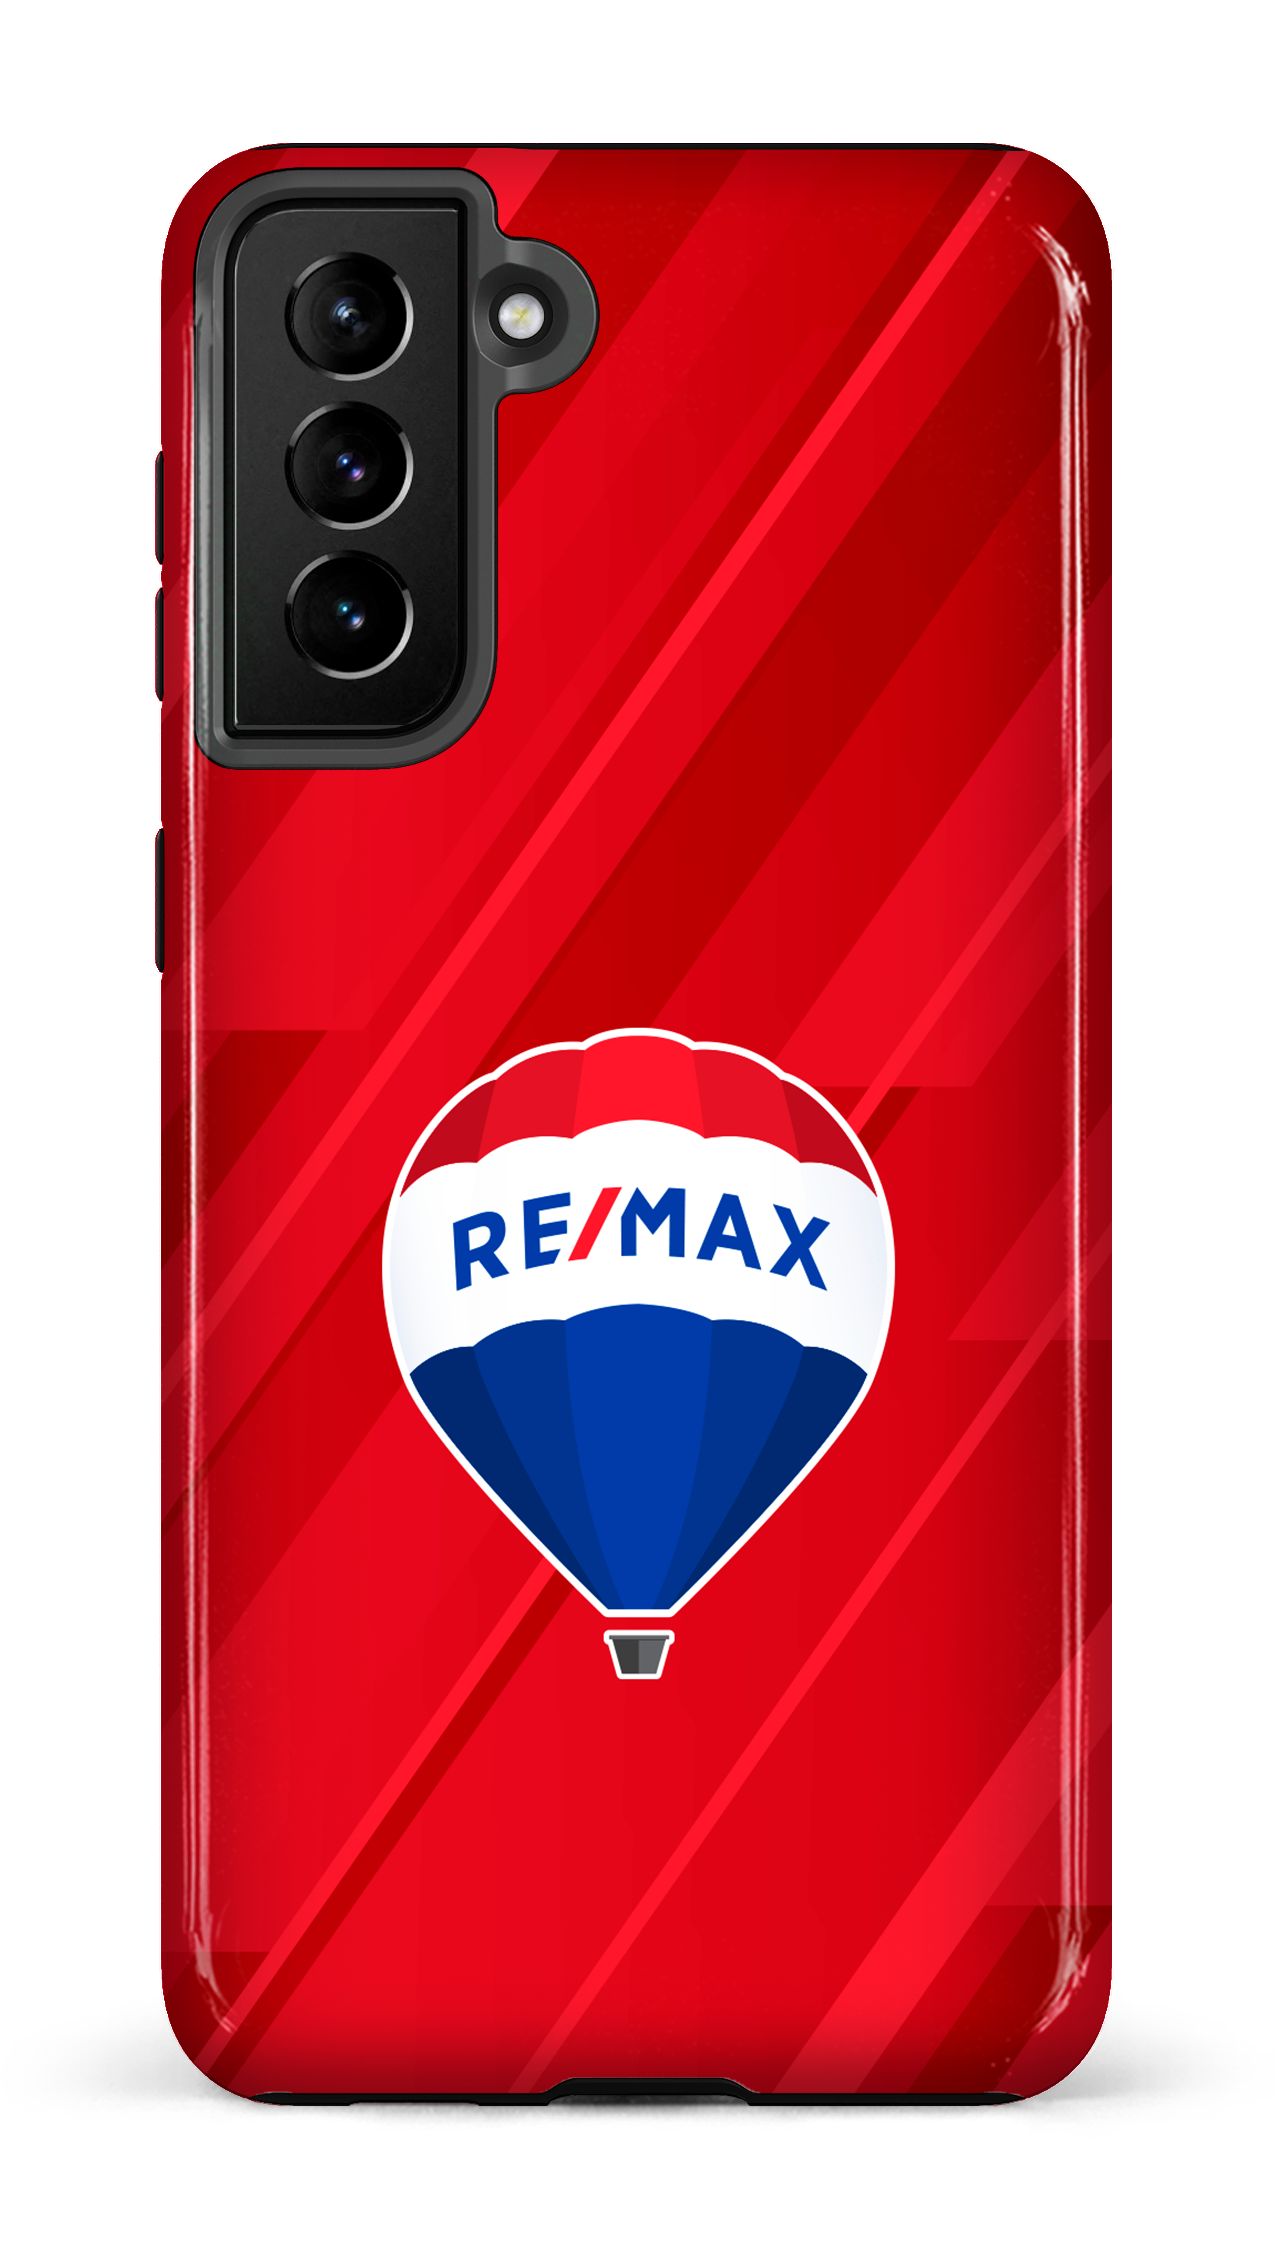 Remax Rouge - Galaxy S21 Plus